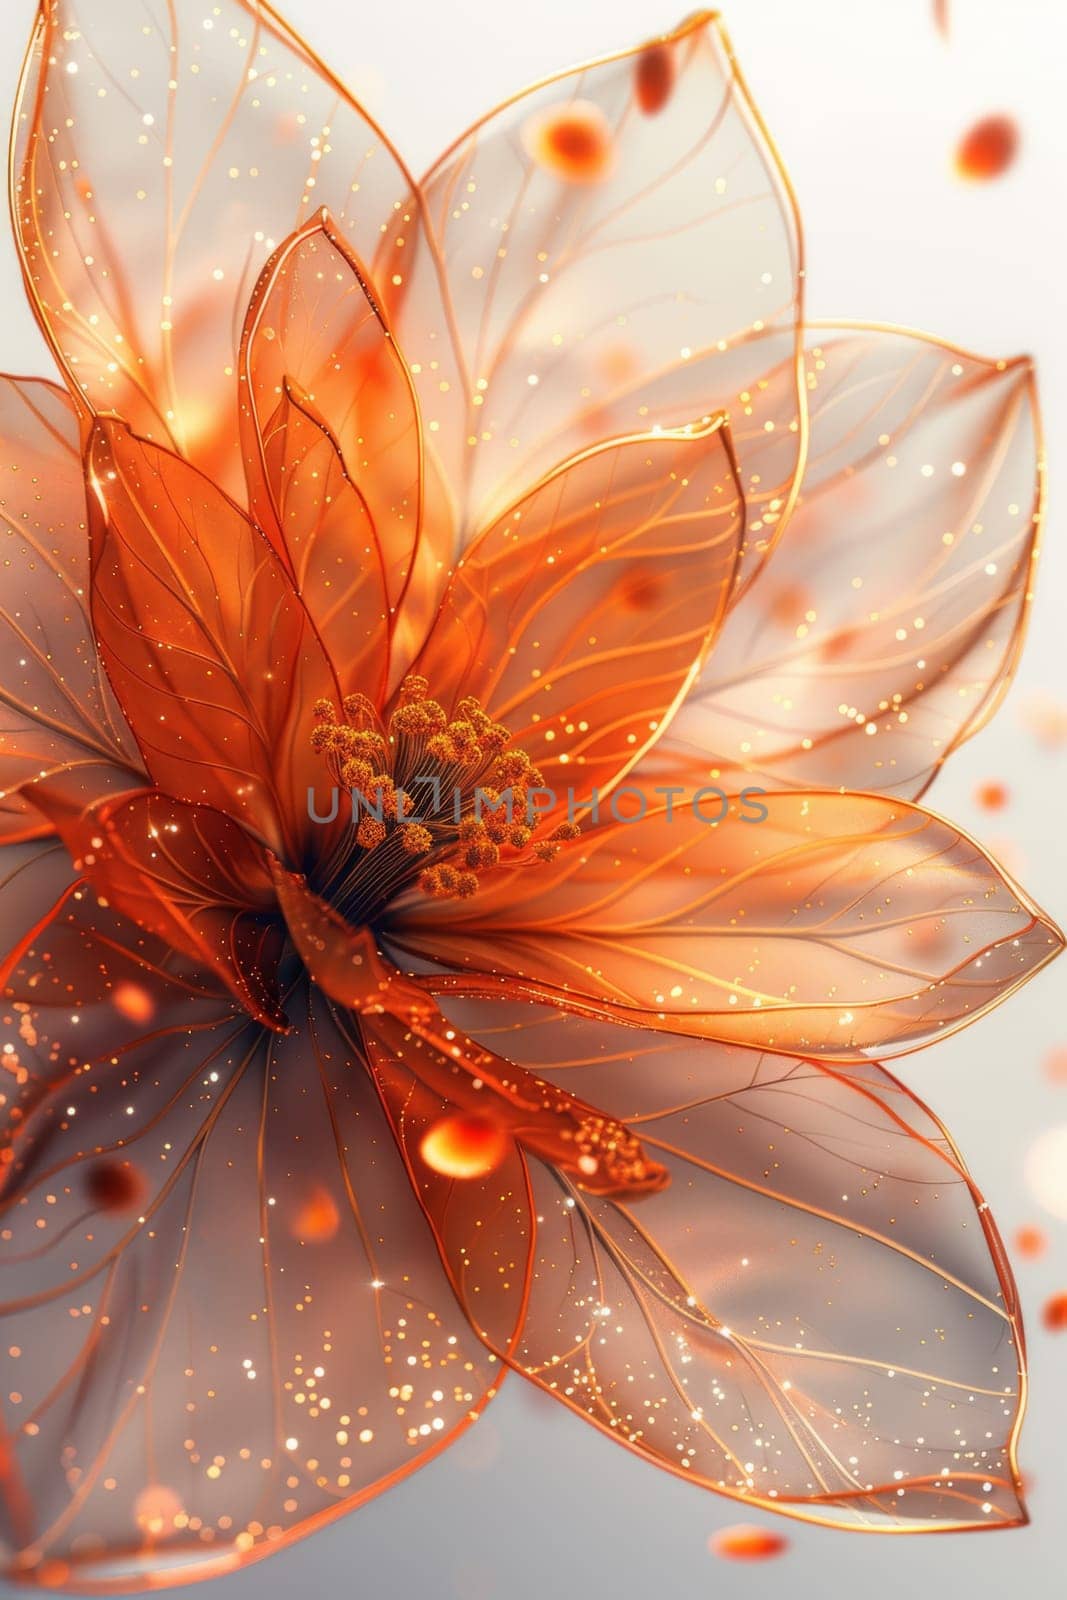 A magical orange flower with petals on a white background by Lobachad